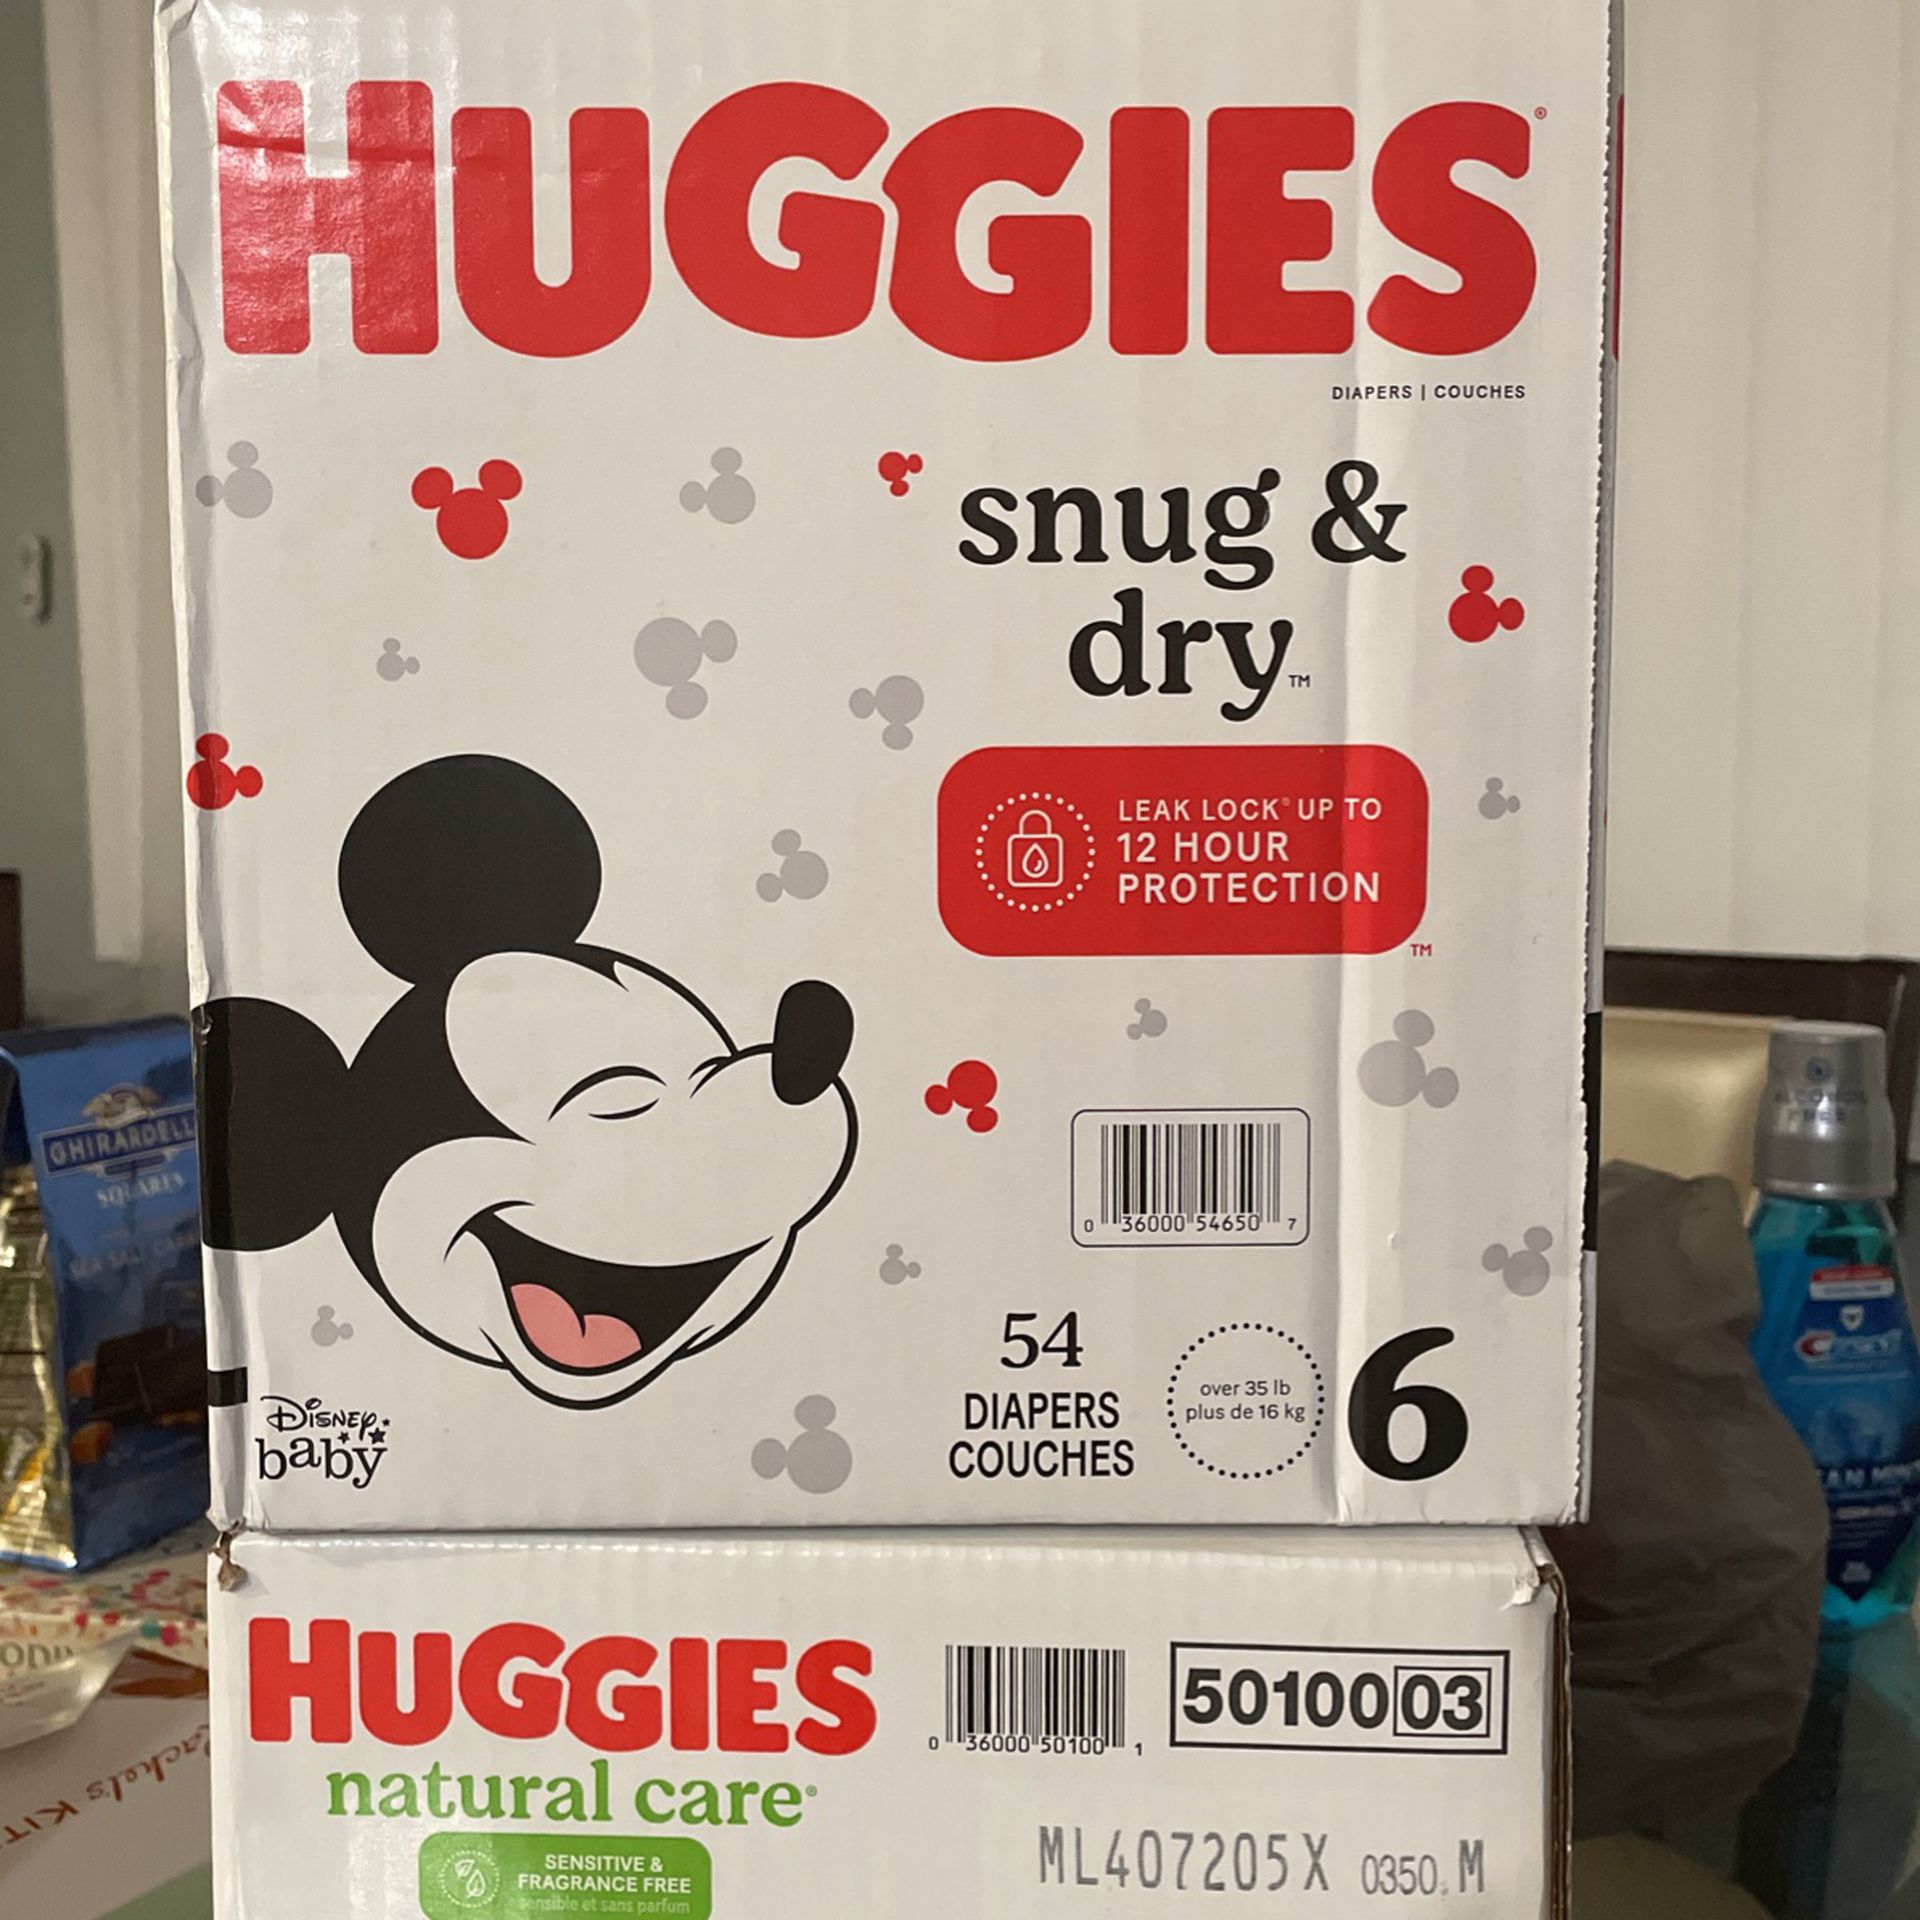 Súper Package 📦 1 Box Huggies Snug Dry And 1 Box Huggies Natural Care Wipes 